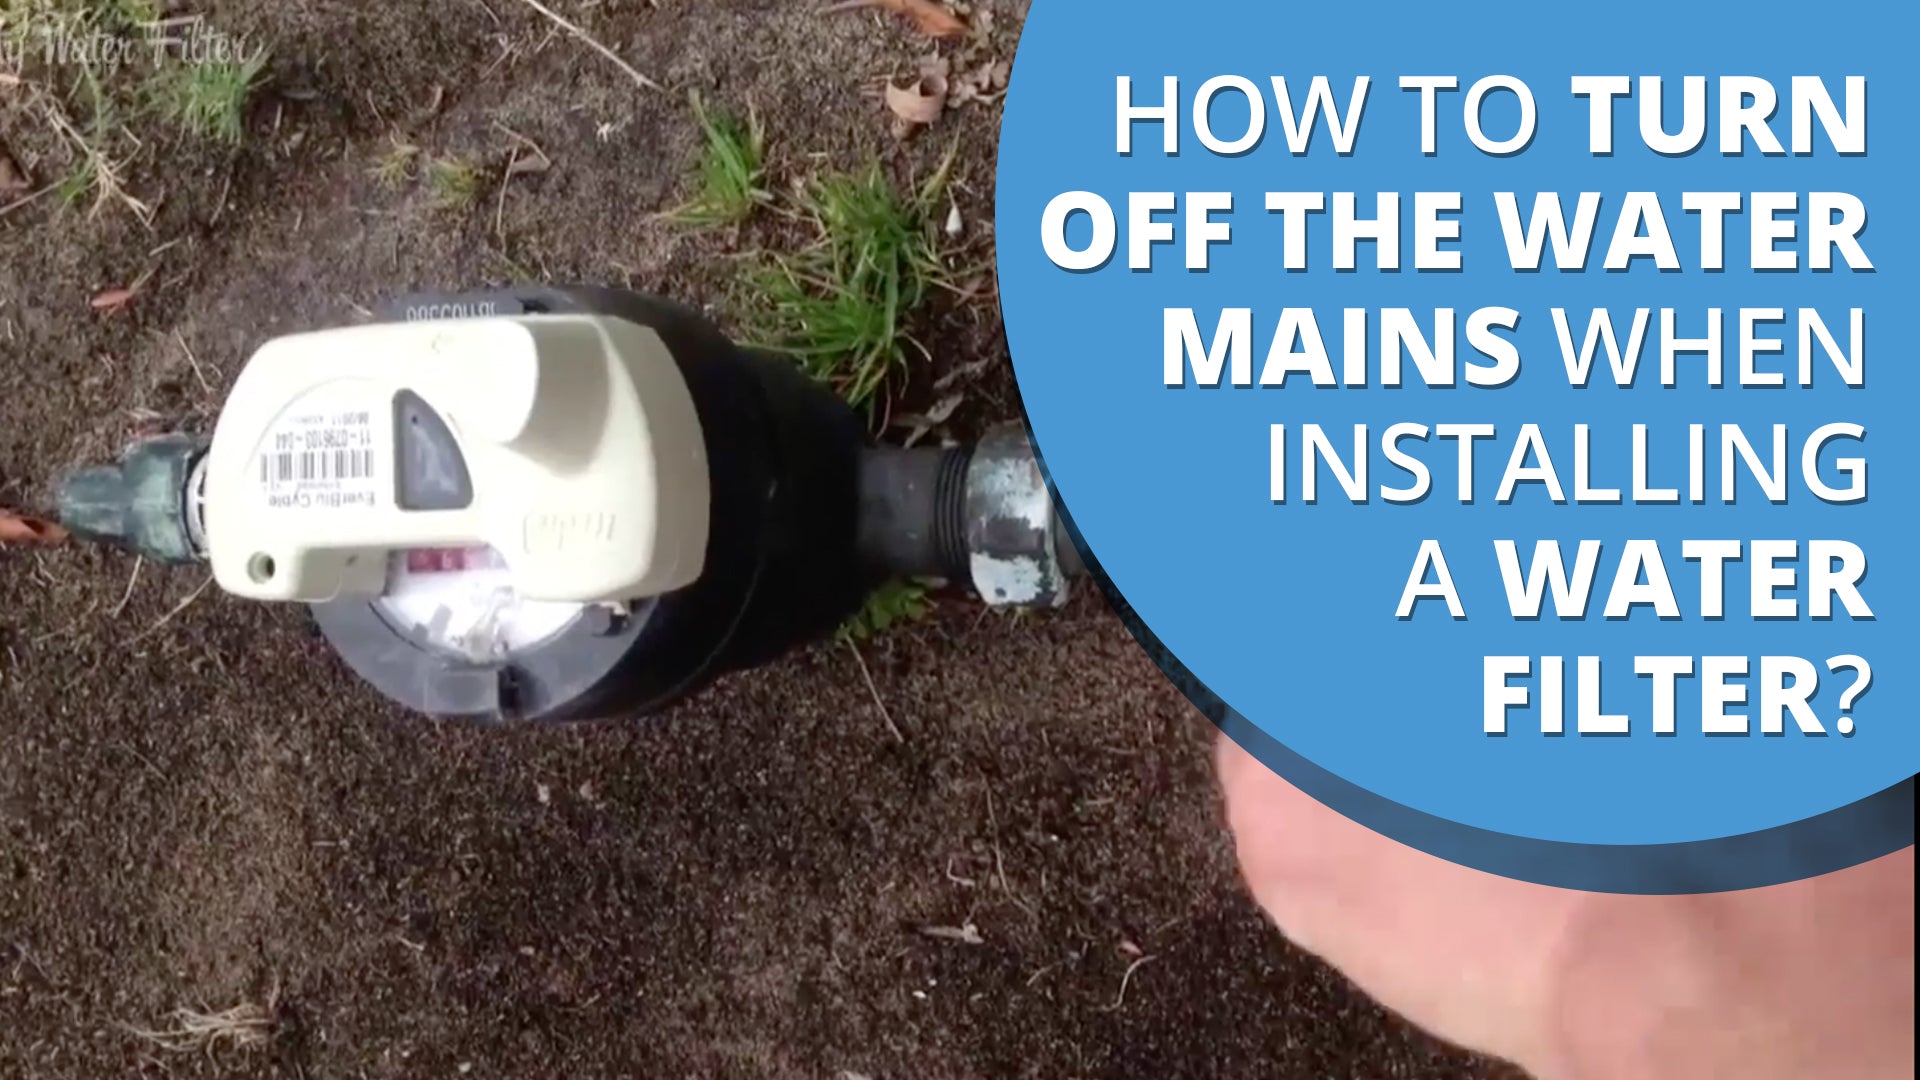 How To Turn Off Your Water Mains When Installing a Water Filter